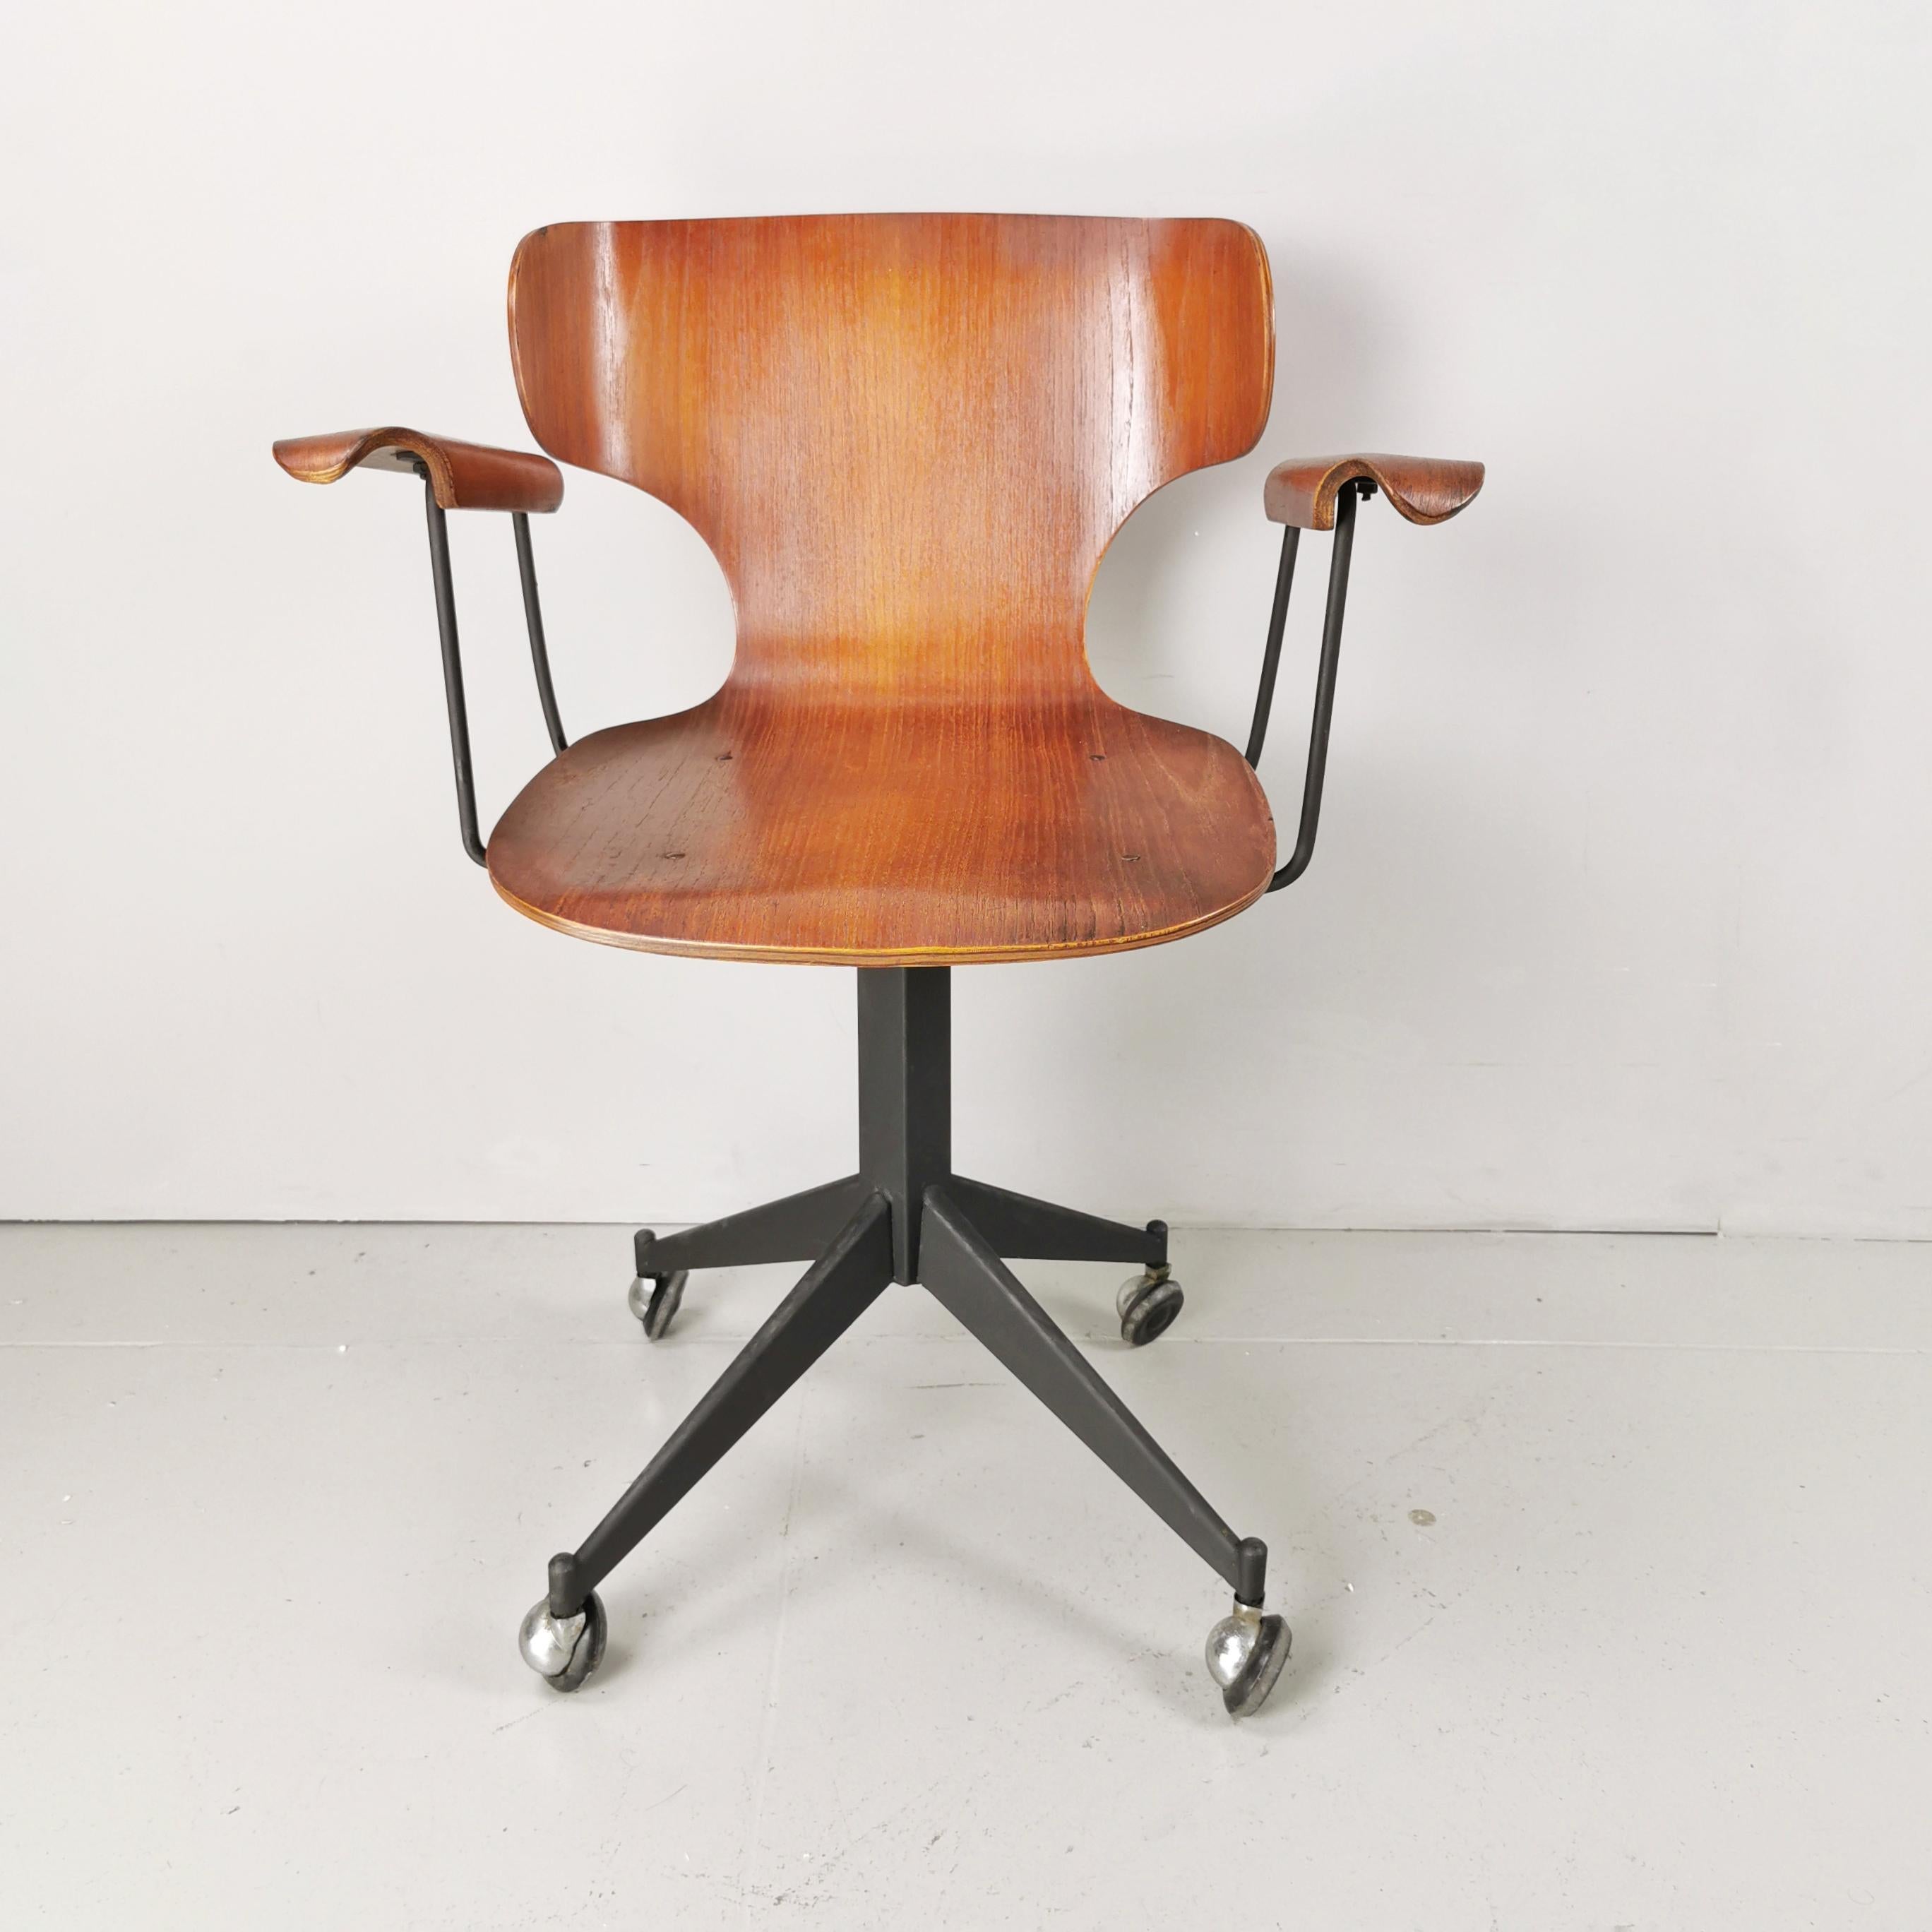 Mid-Century Modern rare 50s/60s curved wooden office chair en vente